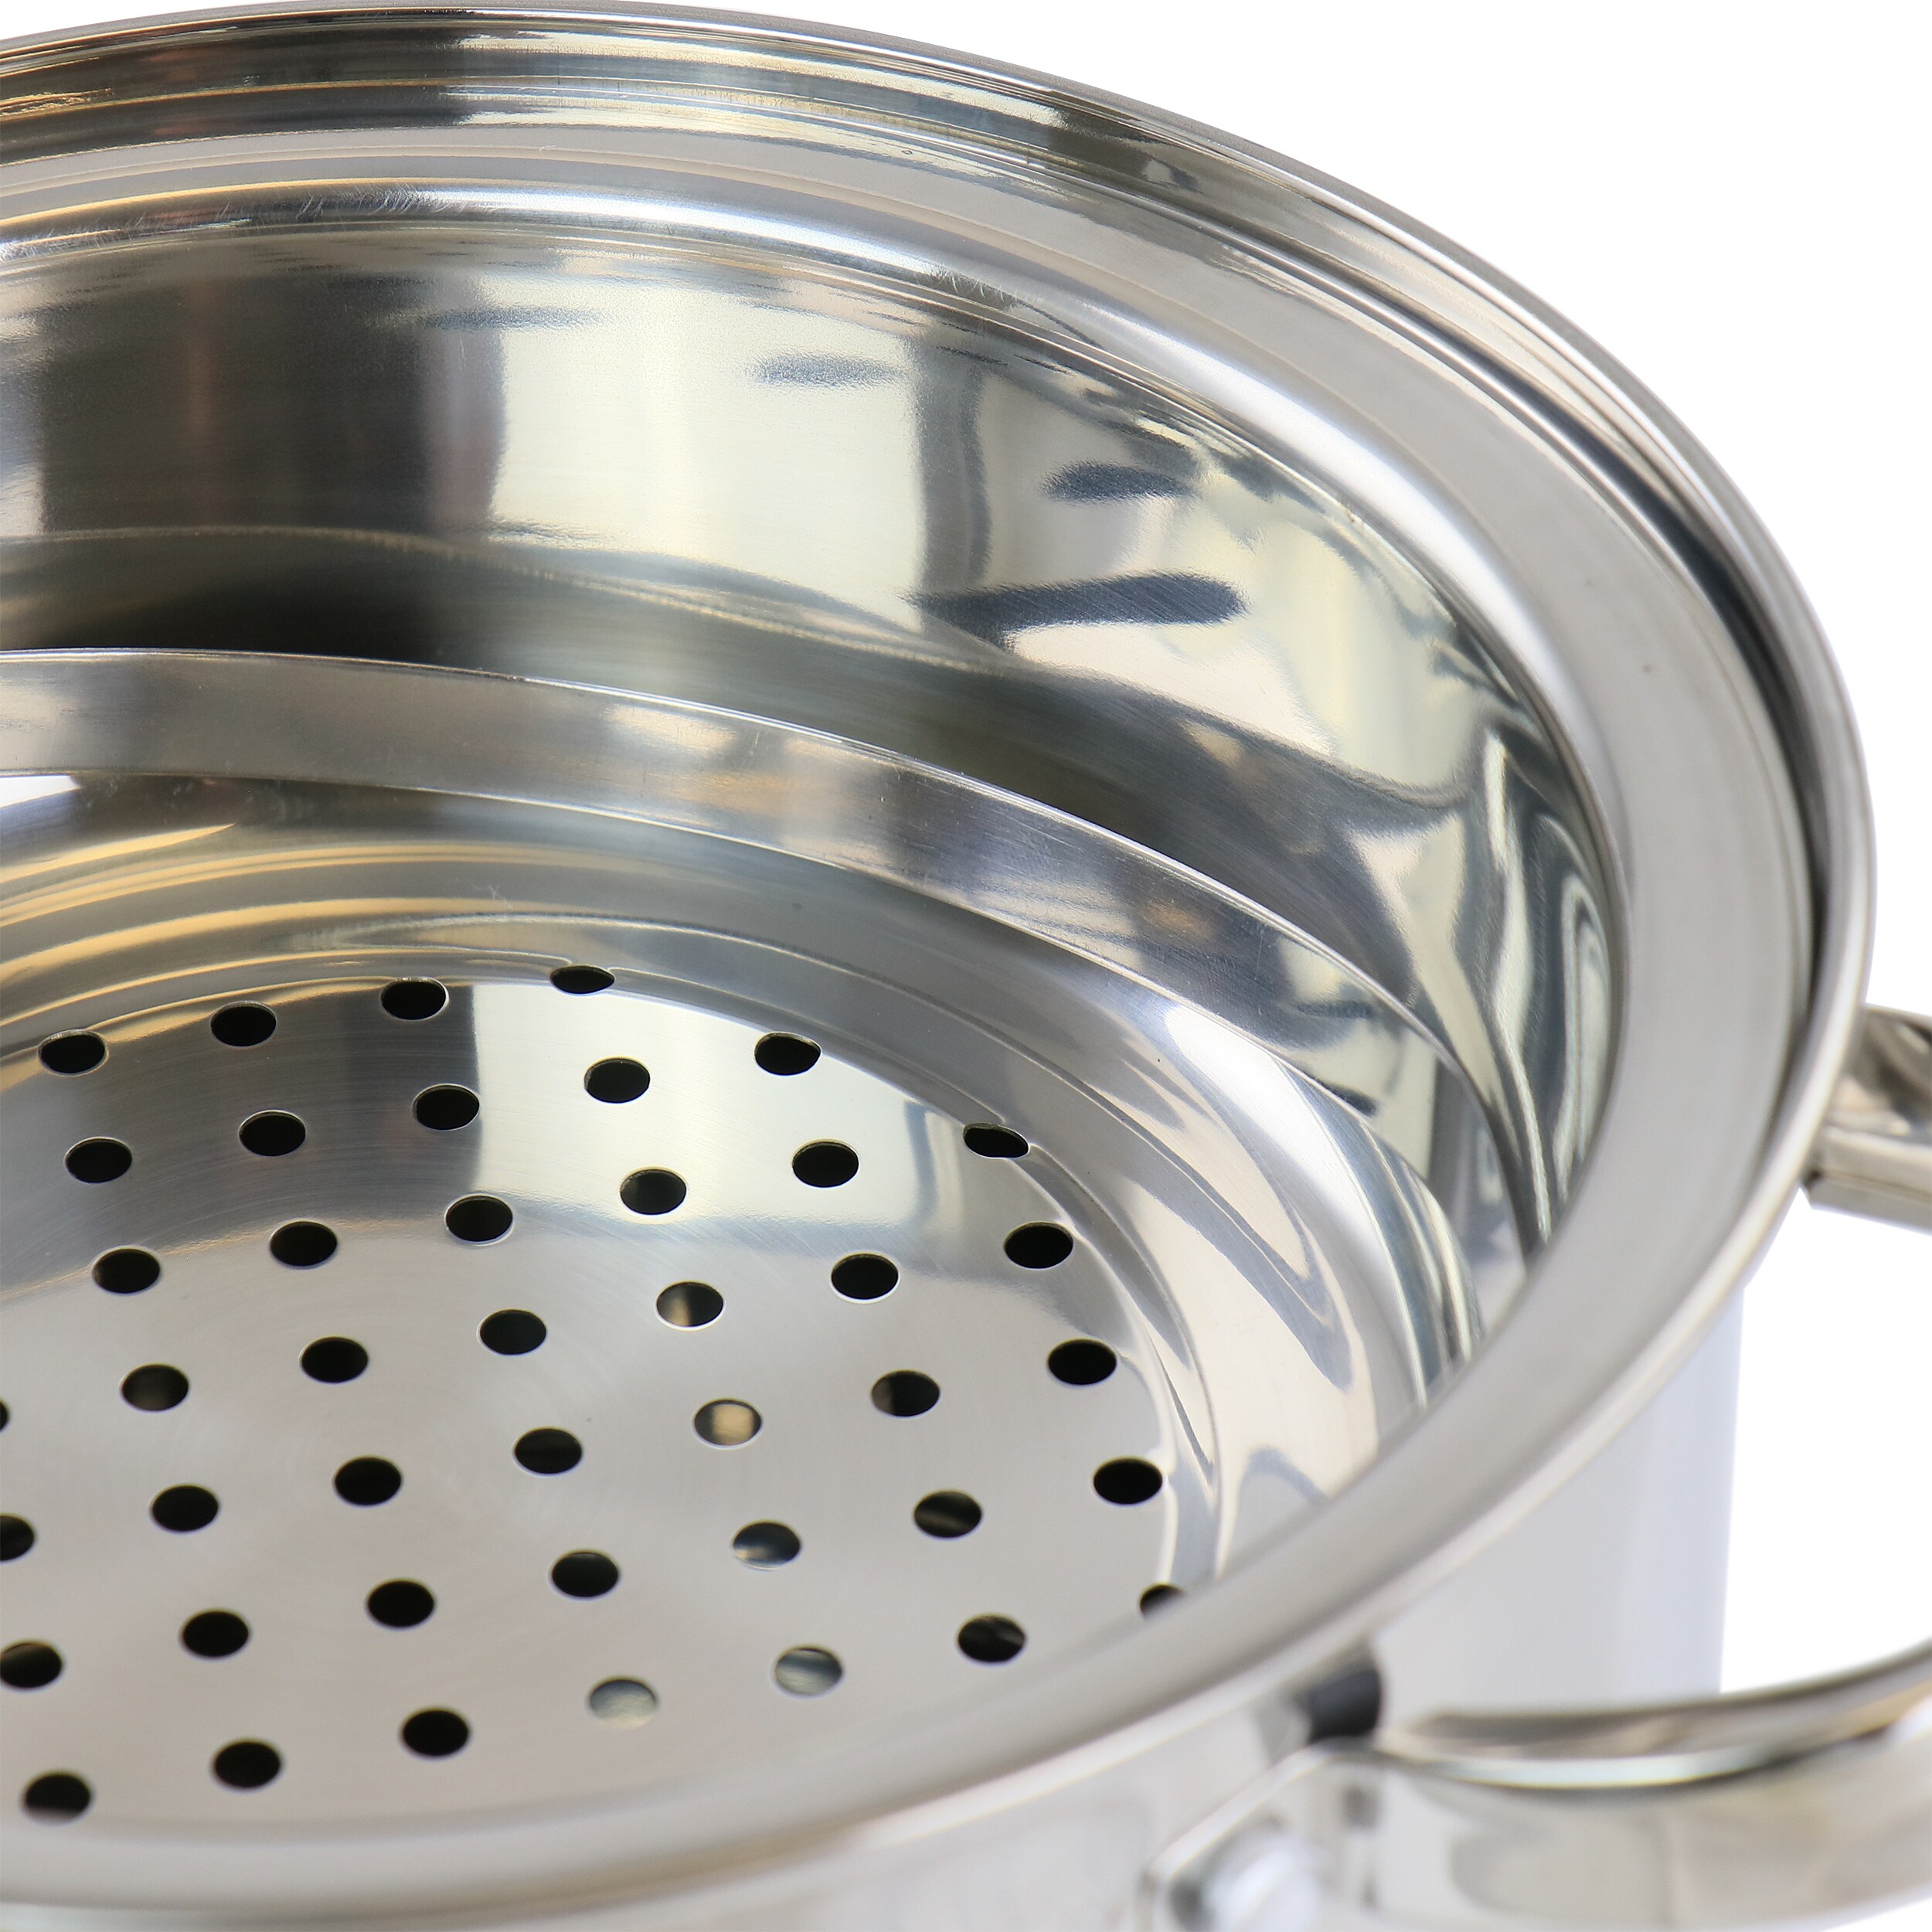 Nutrichef Steamer Insert with Lid - Stainless Steel